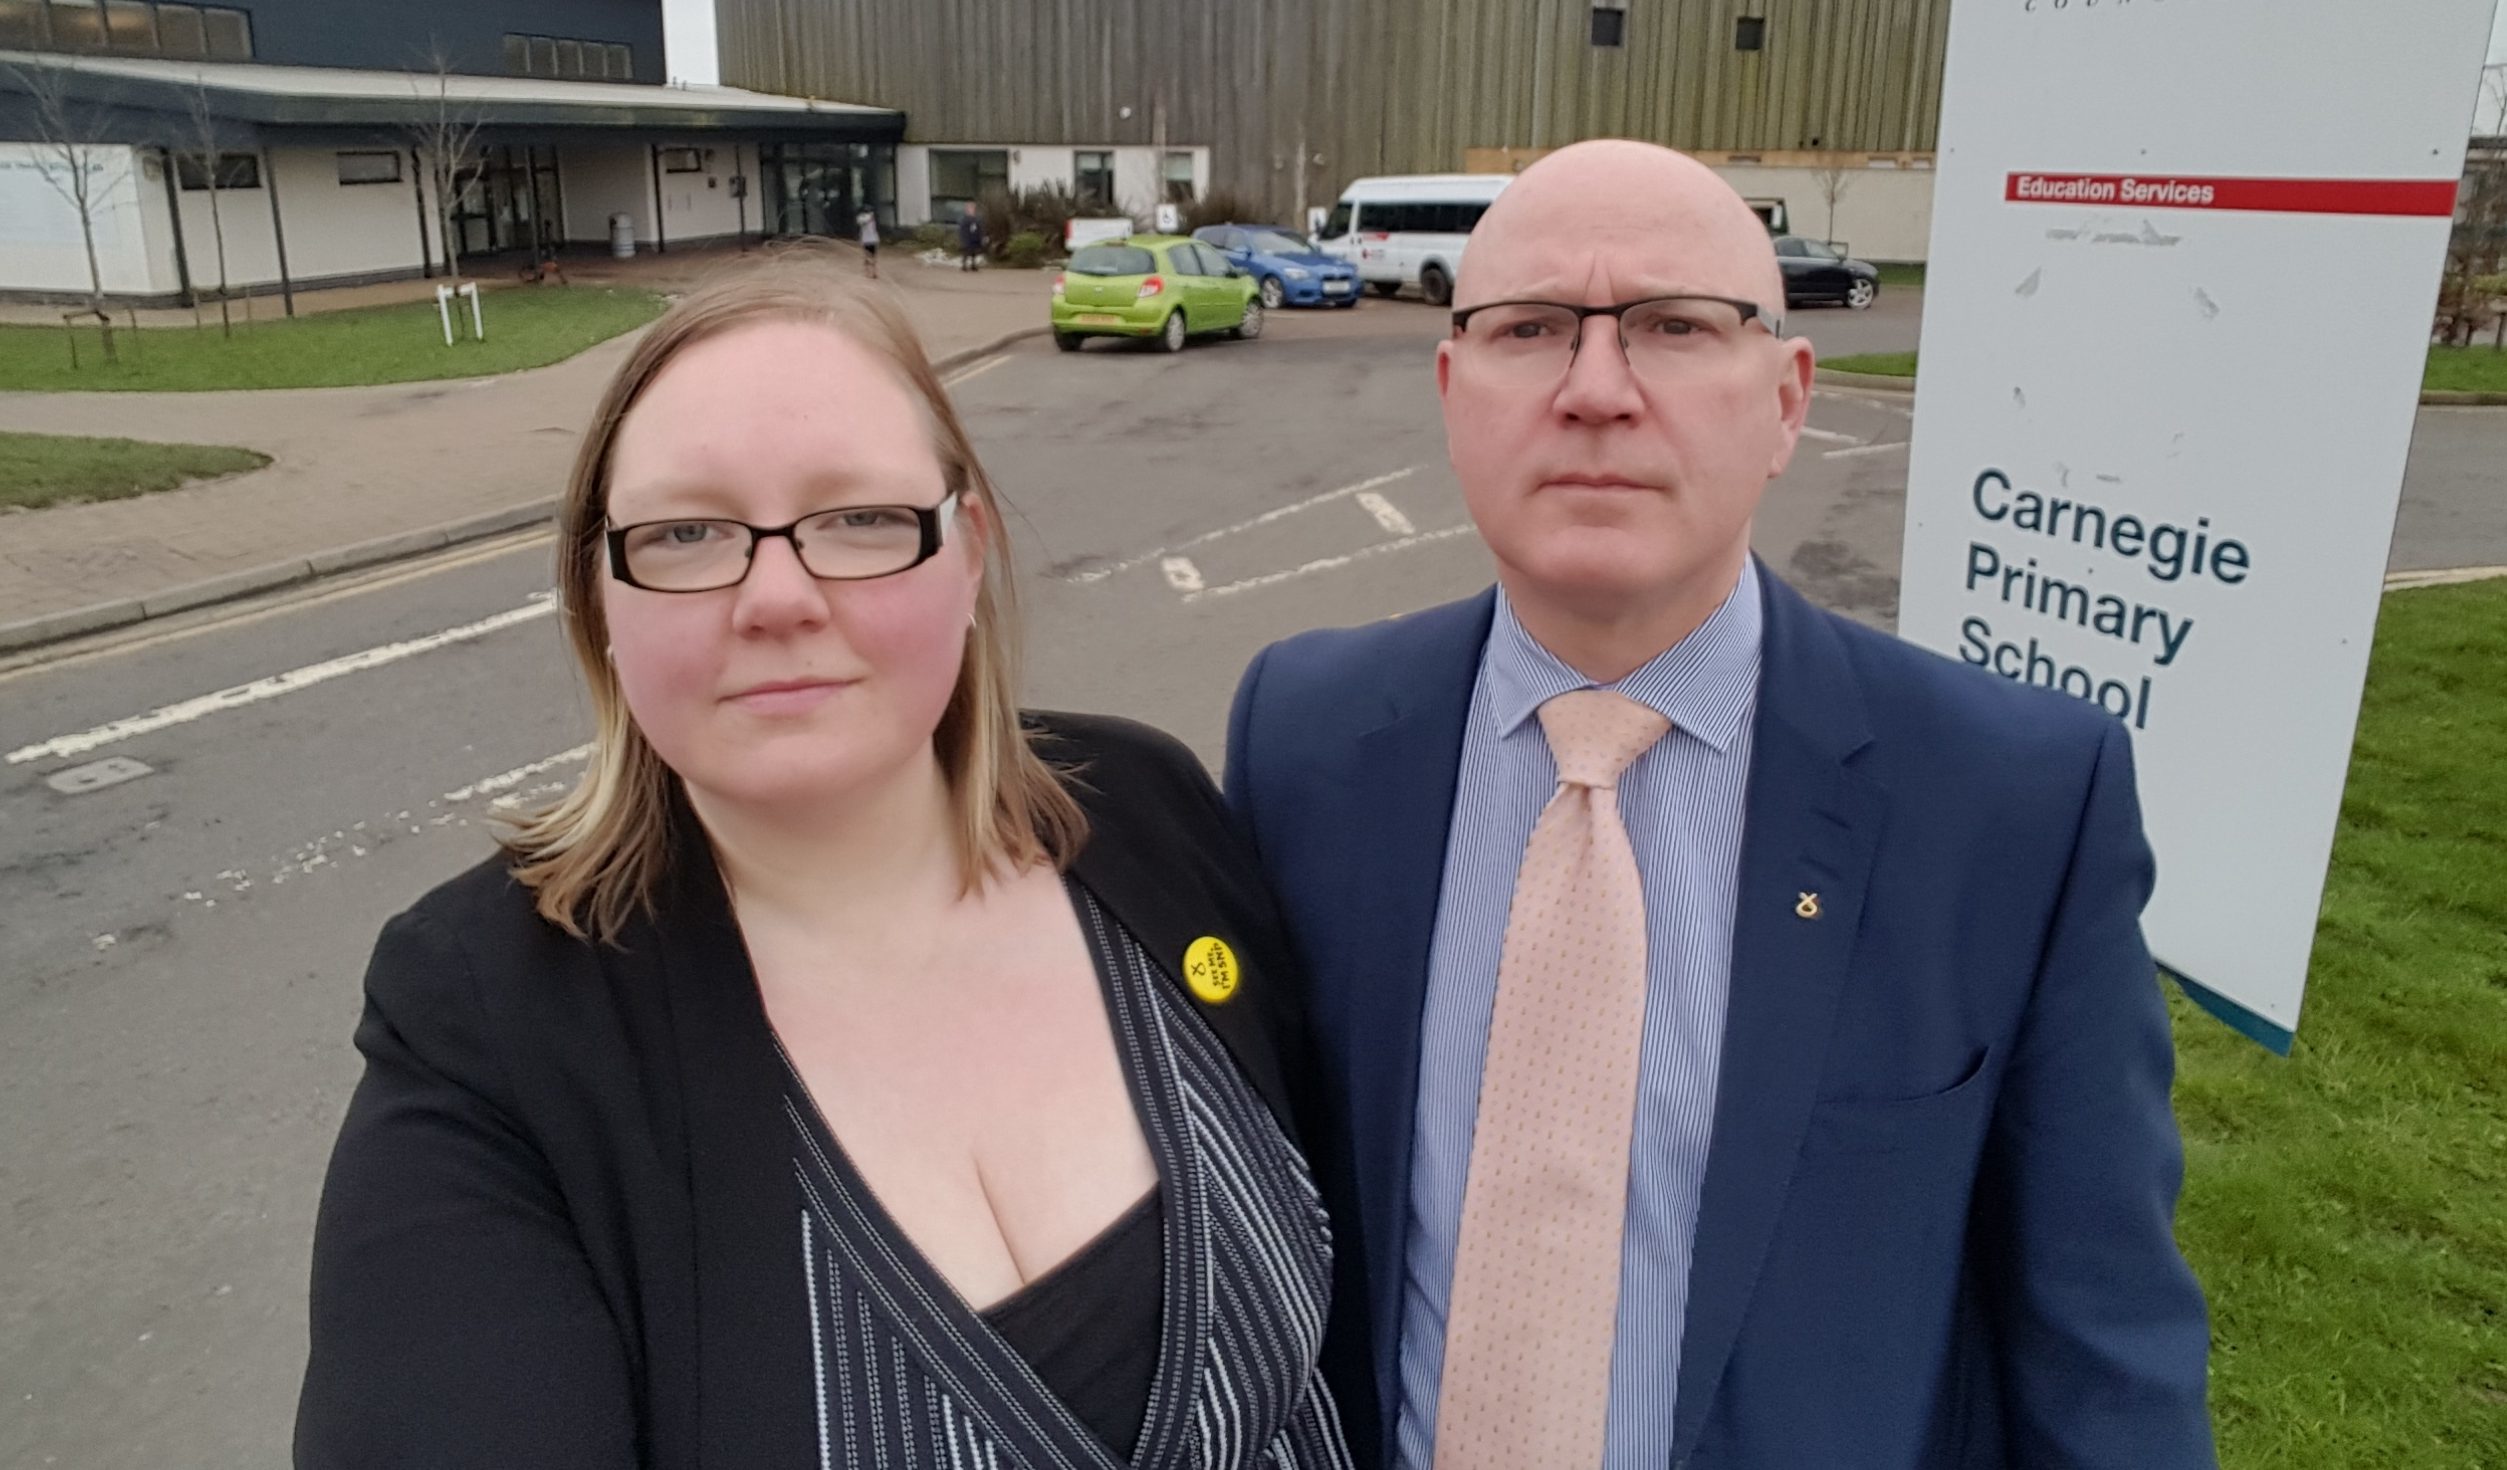 SNP councillors Fay Sinclair and Neale Hanvey have voiced concerns over savings proposals put forward by the administration.